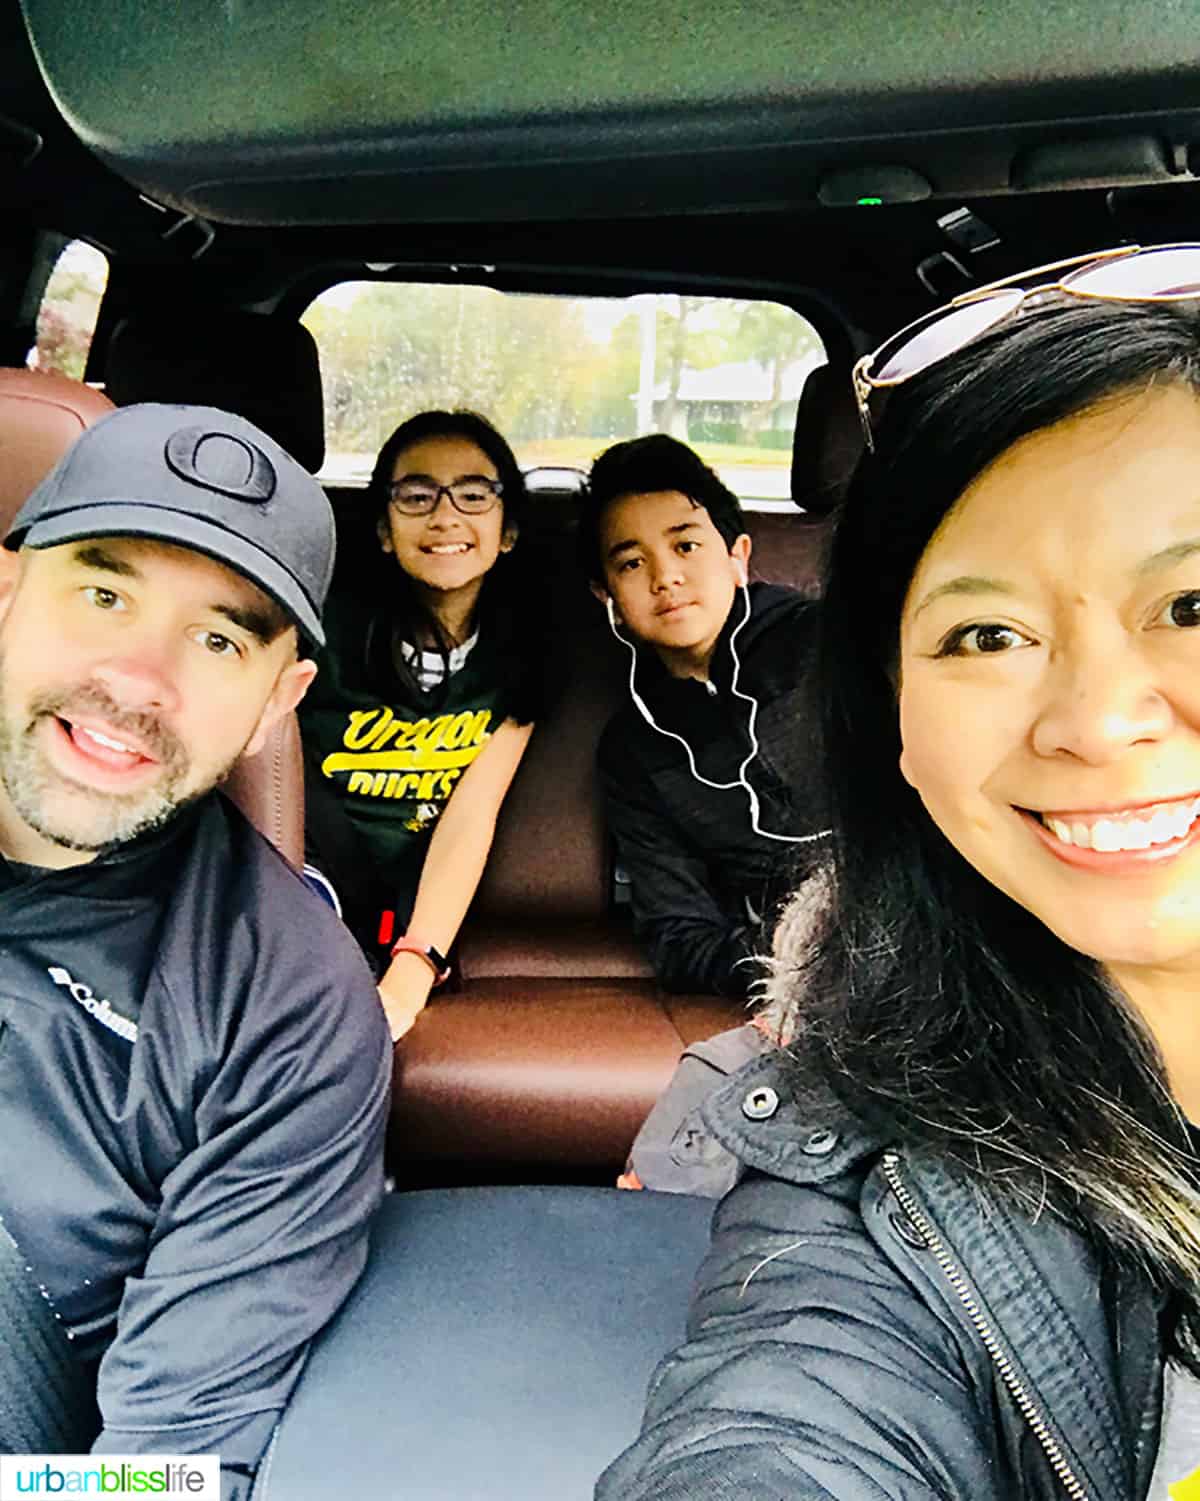 family of four in a car for a road trip.